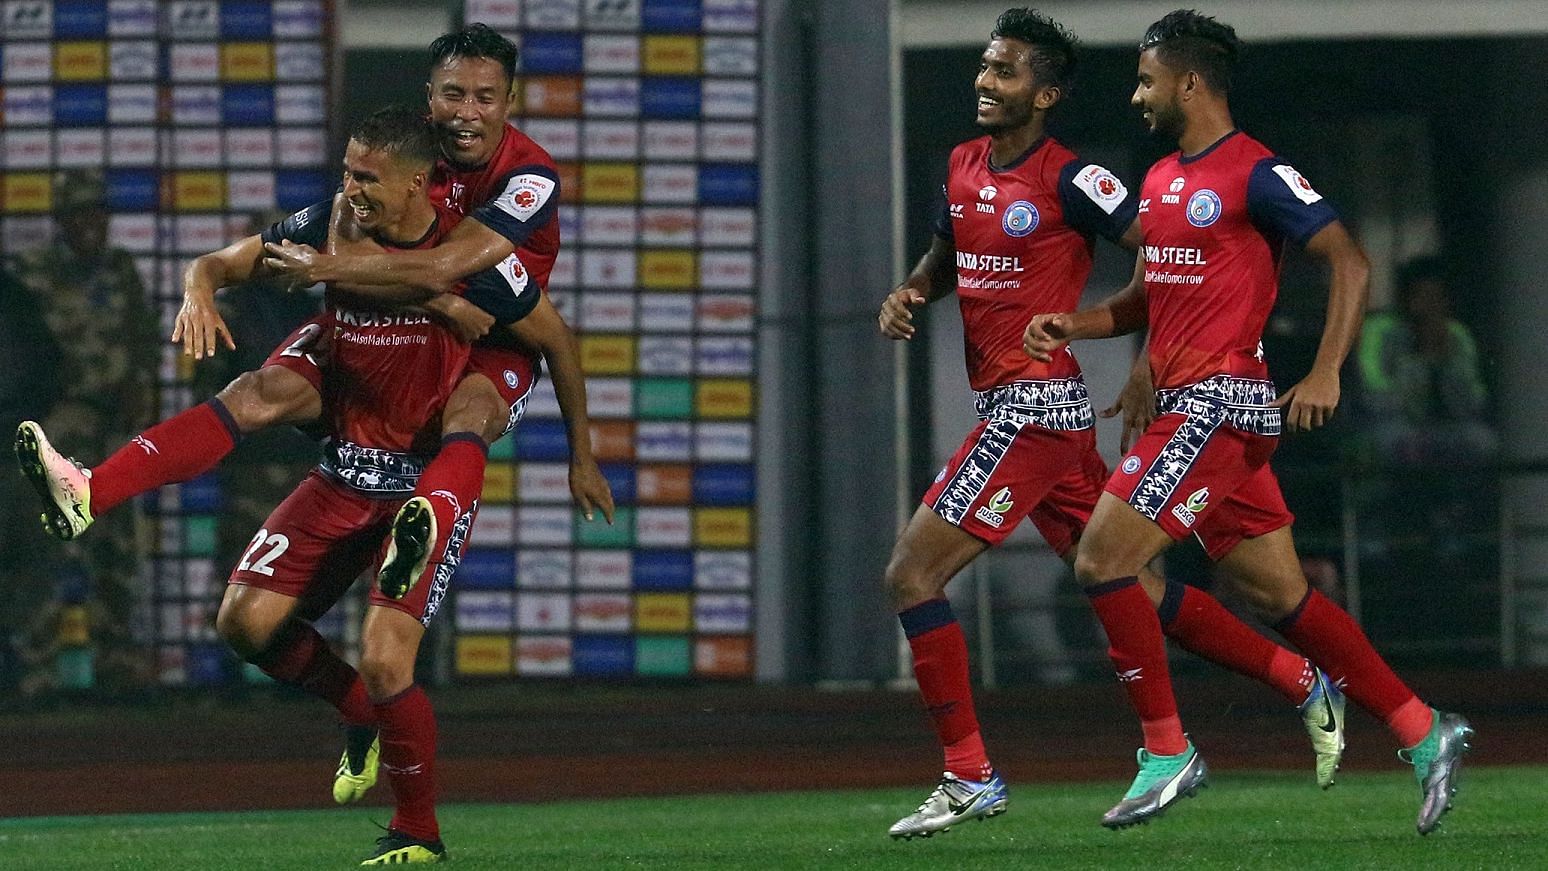 Jamshedpur FC players celebrate their win by 1-0 against Mumbai City FC on Friday.